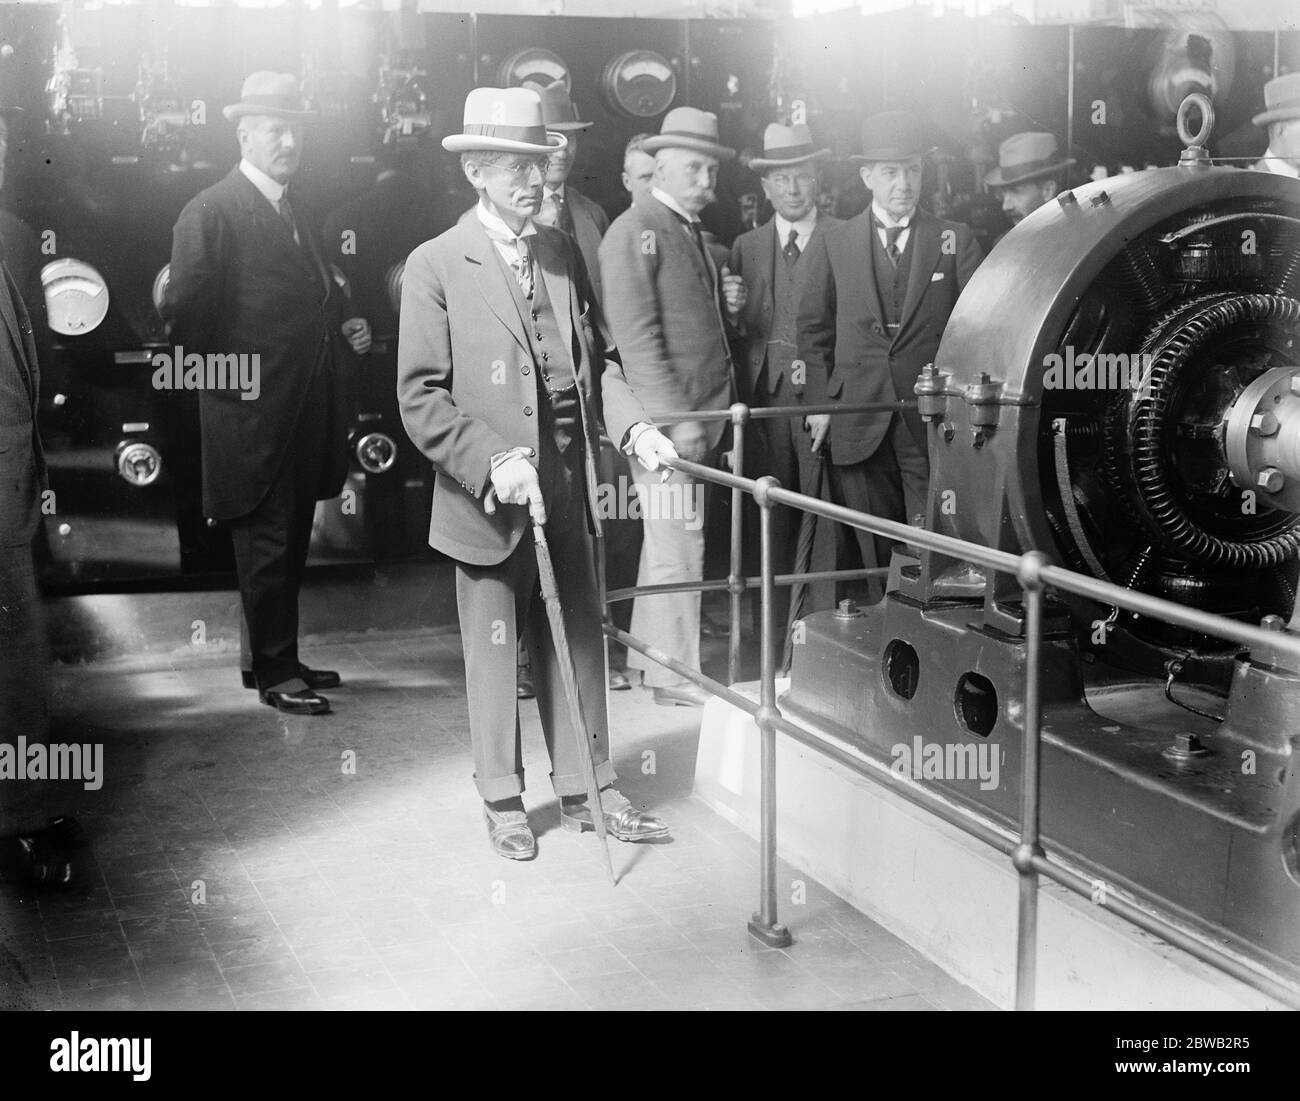 Linking up the Empire by wireless chain Mr Kellaway the Postmaster General opened the first station of the Imperial Wireless Chain at Leafield near Oxford on Thursday , here is one of the huge leading insulators 18 August 1921 Stock Photo